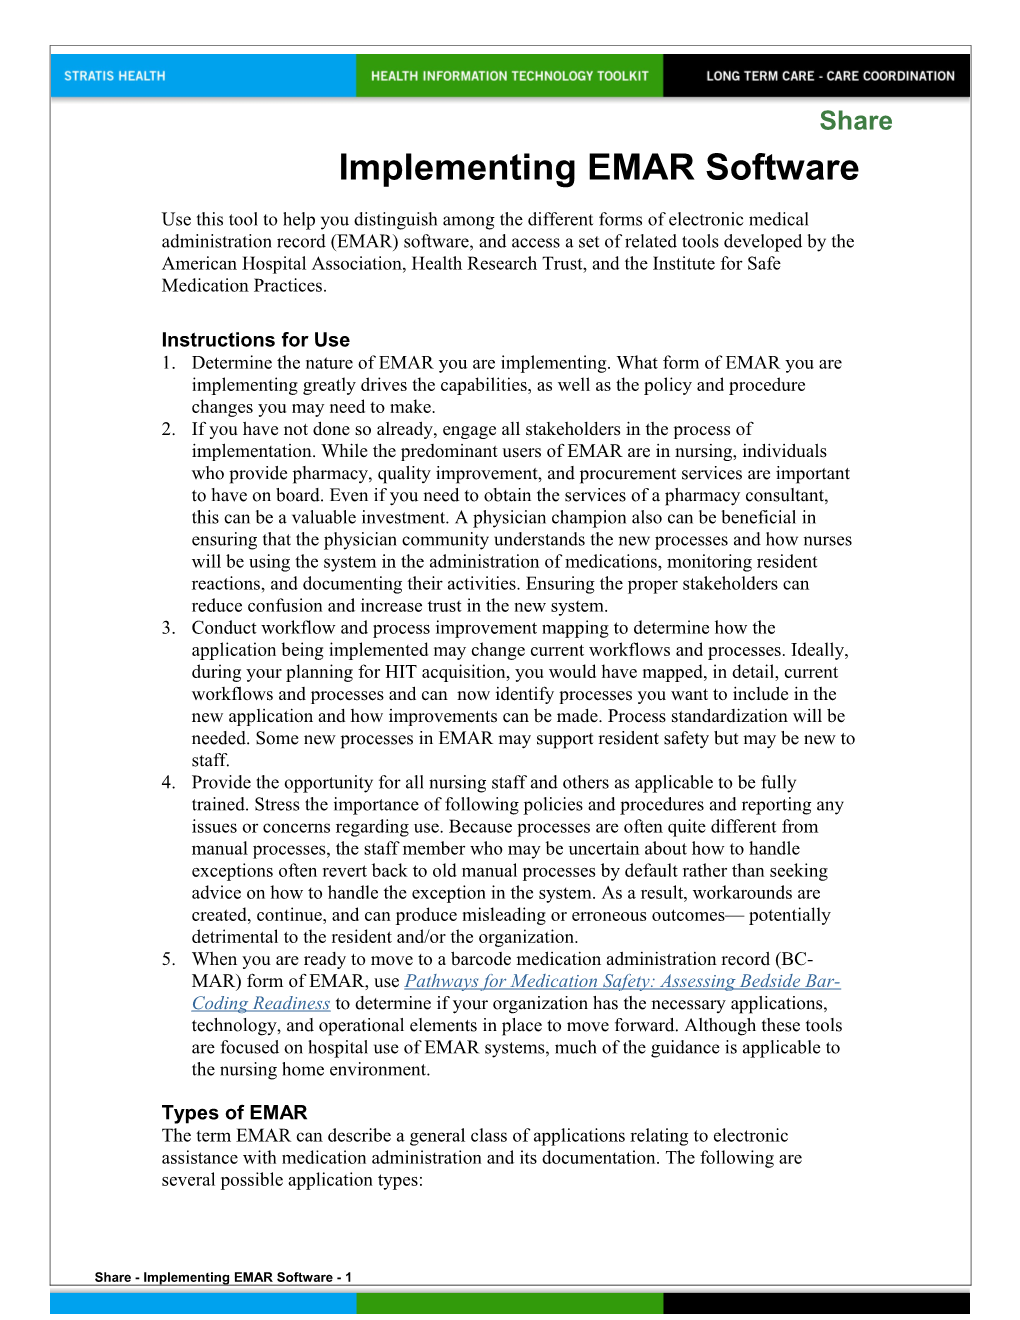 Strategies to Implement Electronic Medical Administration Record (EMAR) Software Health